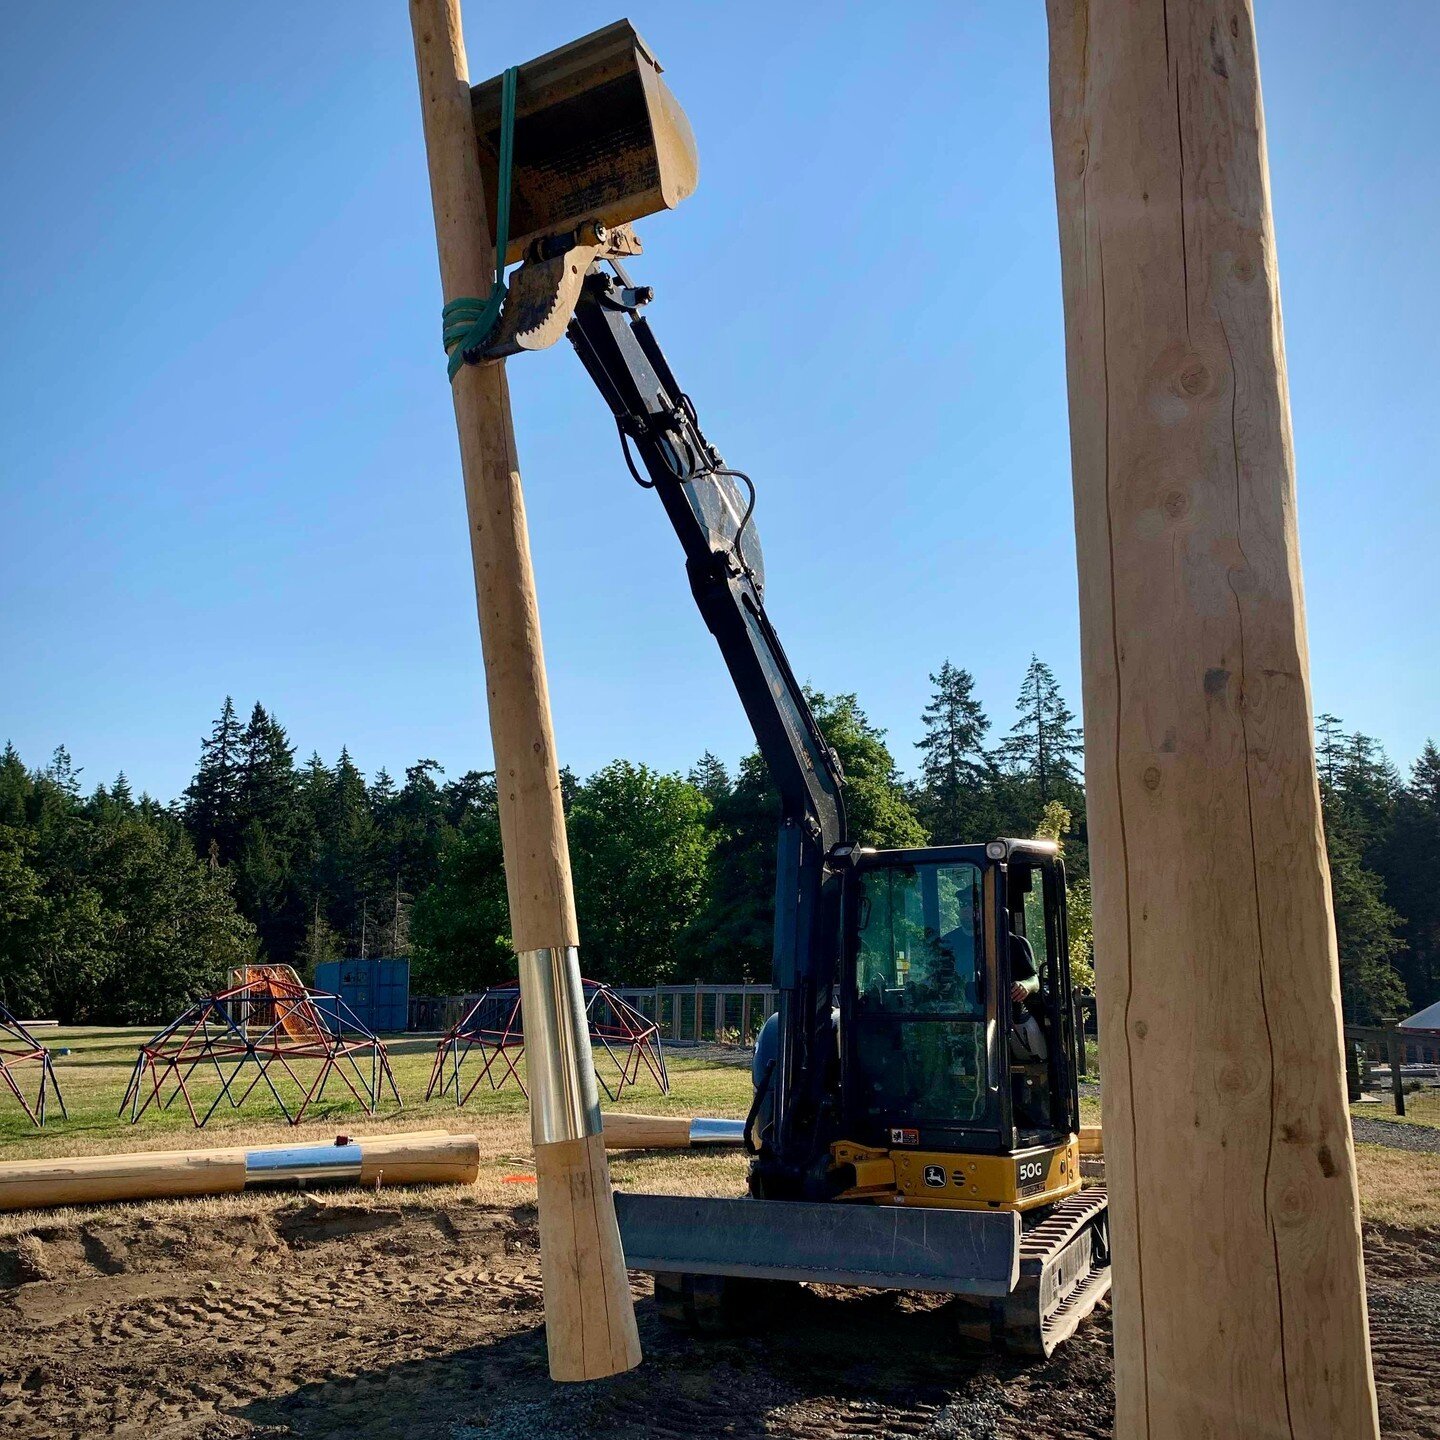 We finished up last week with a whole lot of posts in the ground at @westmontschool... No pressure since school starts back up next week, lol. We will call it added play value that the kids will get a front row seat to the construction of their playg